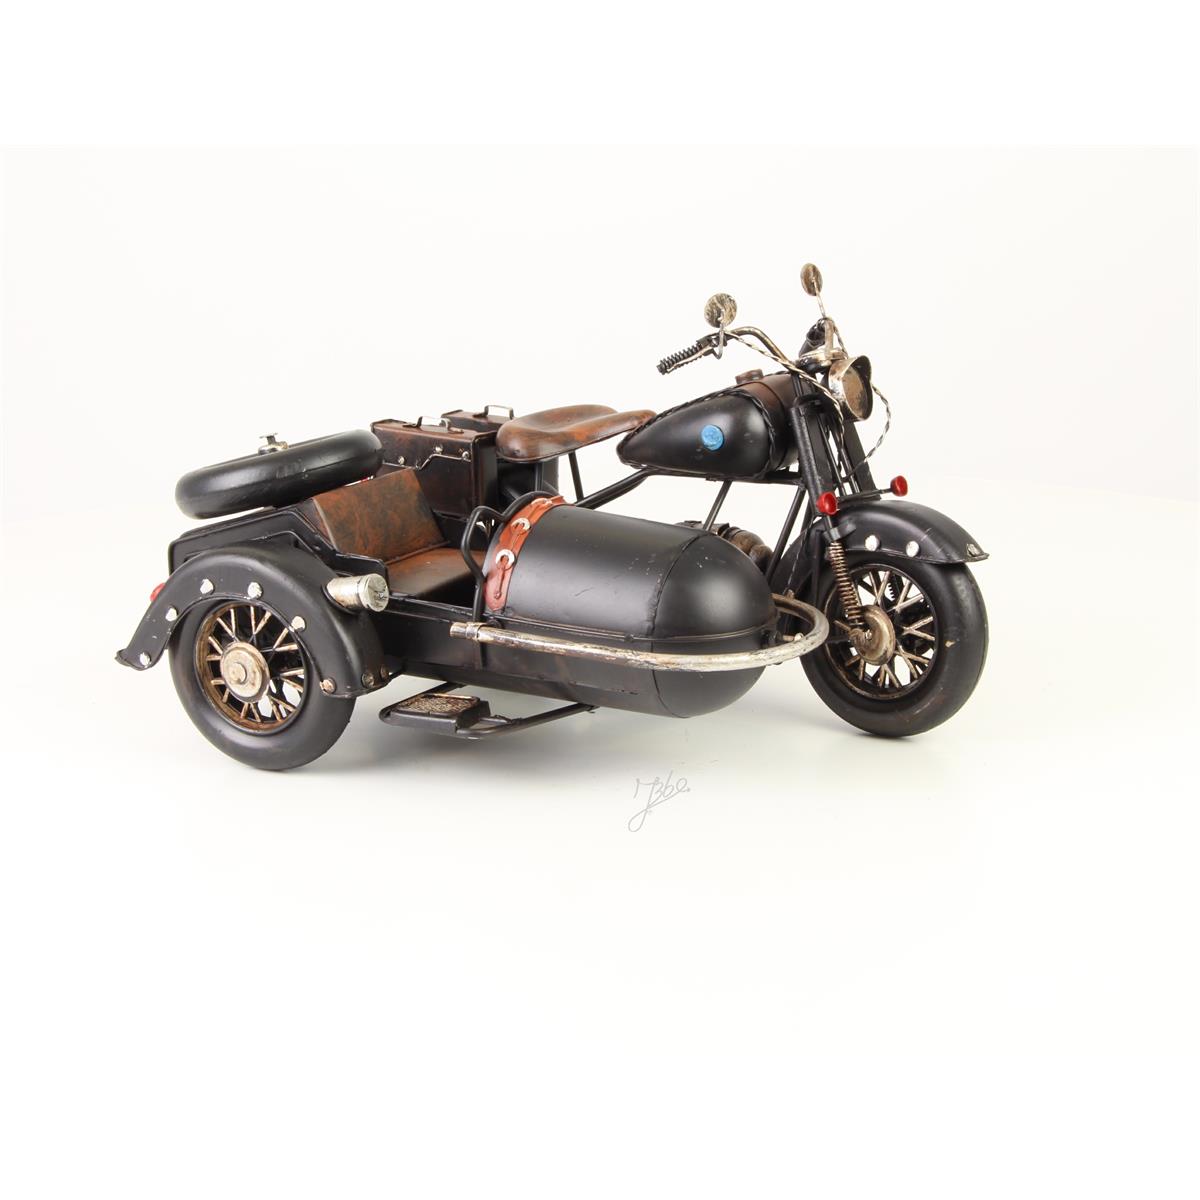 A TIN MODEL OF A MOTORCYCLE WITH SIDECAR